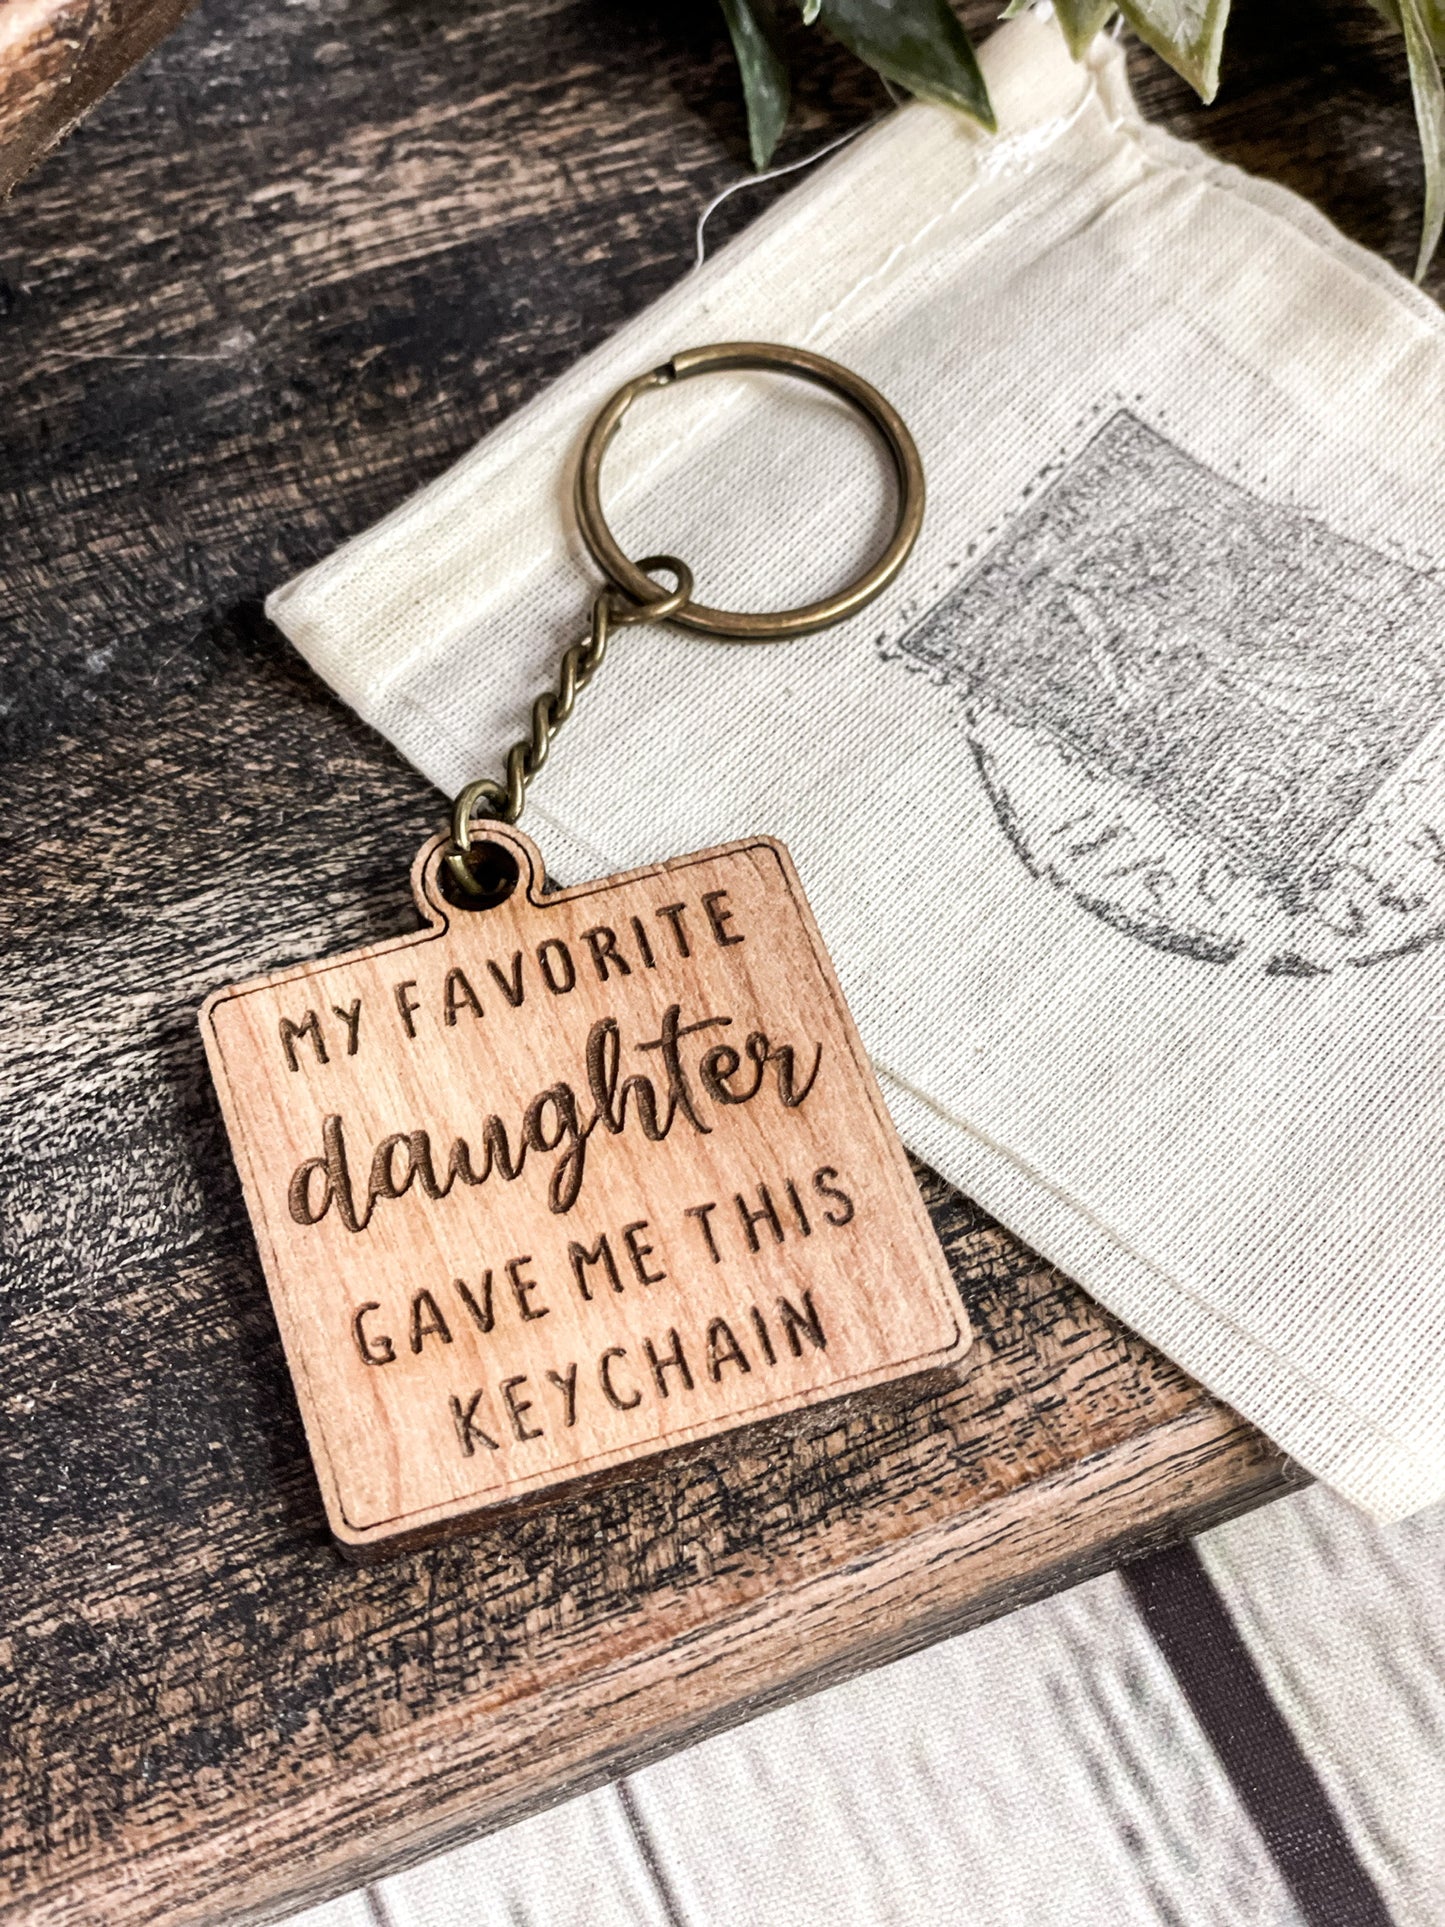 My favorite daughter gave me this - keychain